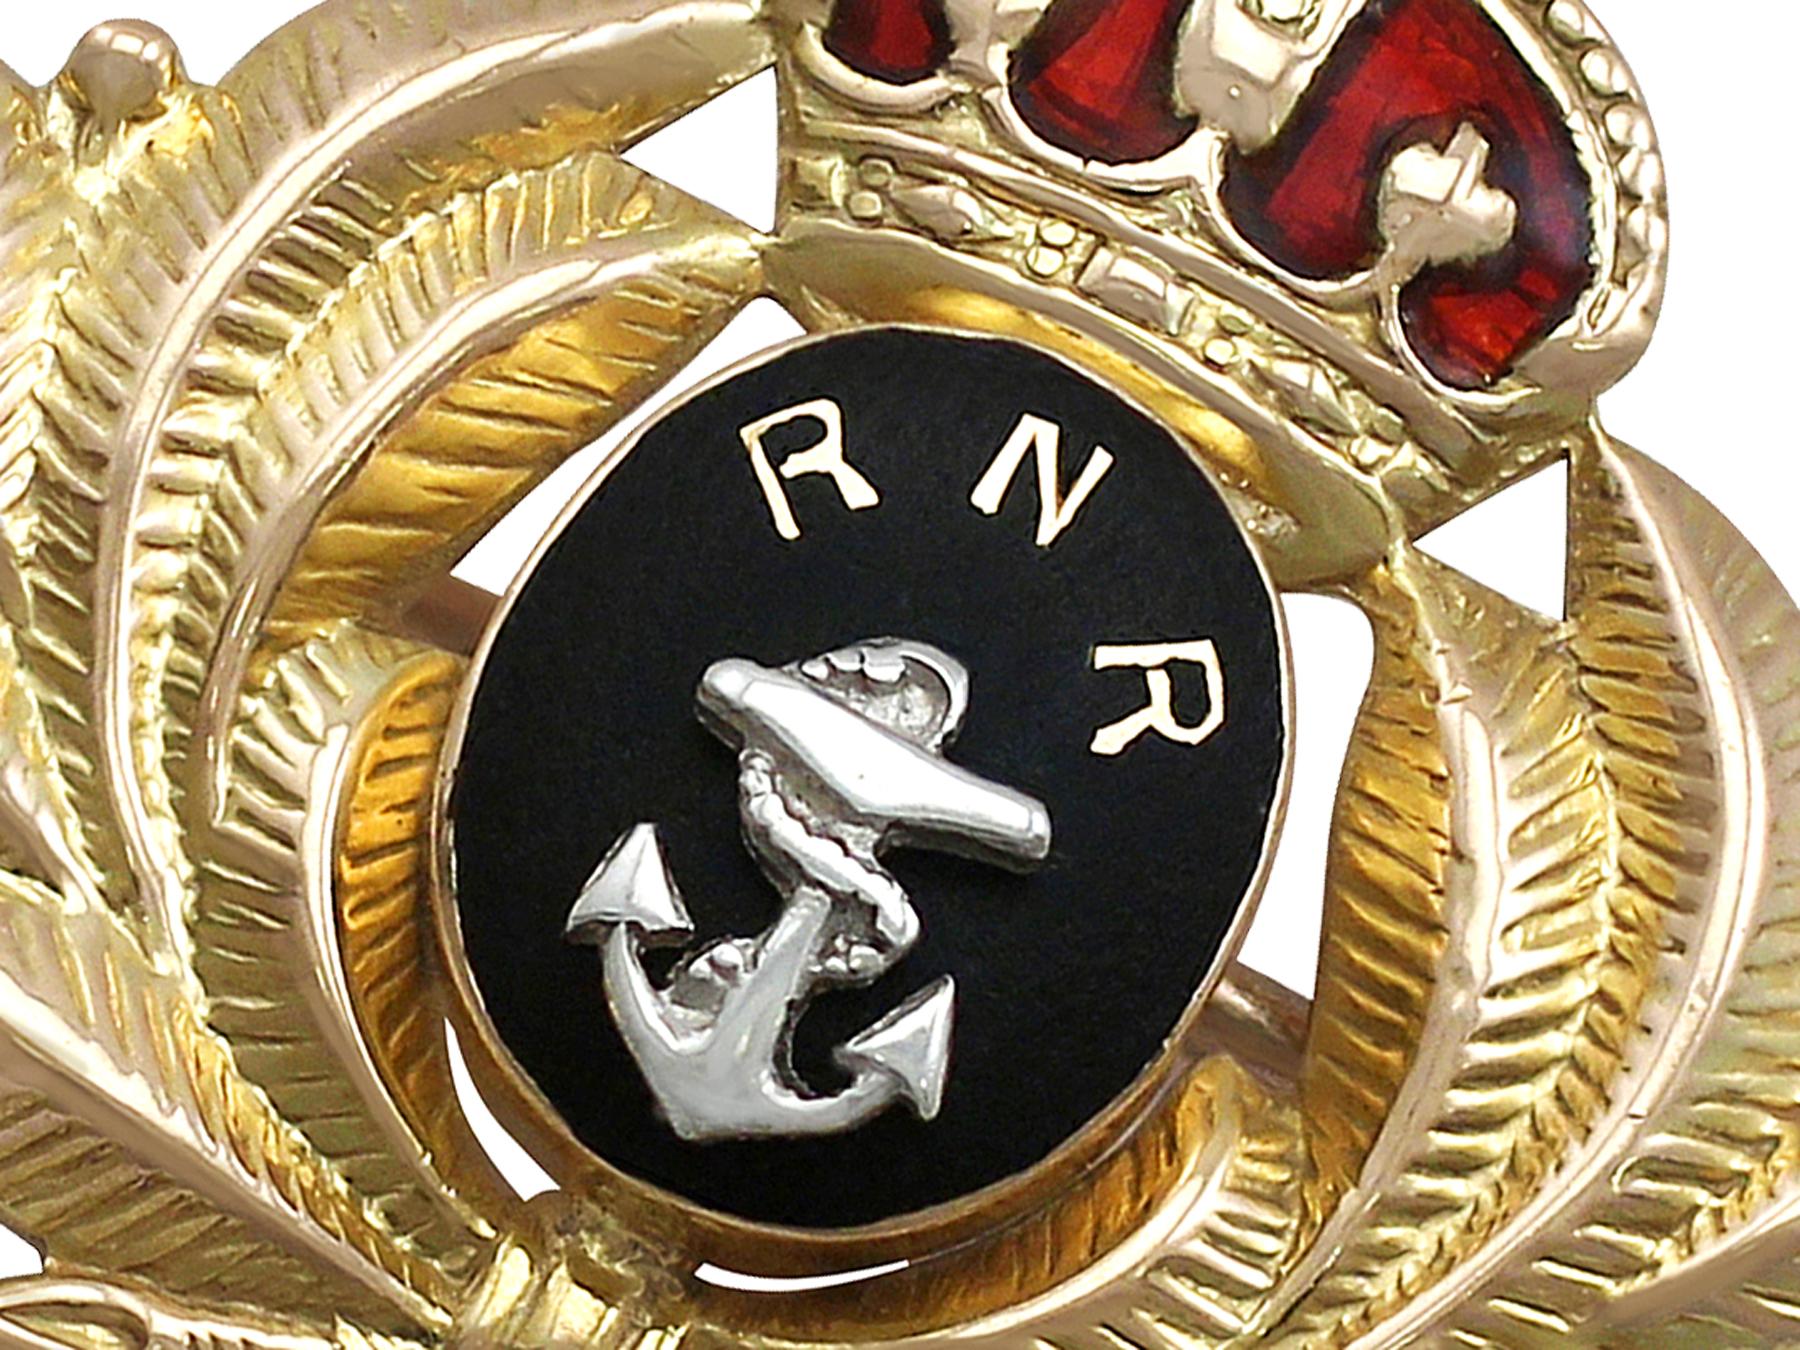 An impressive antique enamel and 15 karat yellow gold 'Royal Navy Reserve' regimental brooch; part of our diverse antique jewelry and estate jewelry collections.

This fine and impressive Royal Naval Reserve brooch has been crafted in 15k yellow